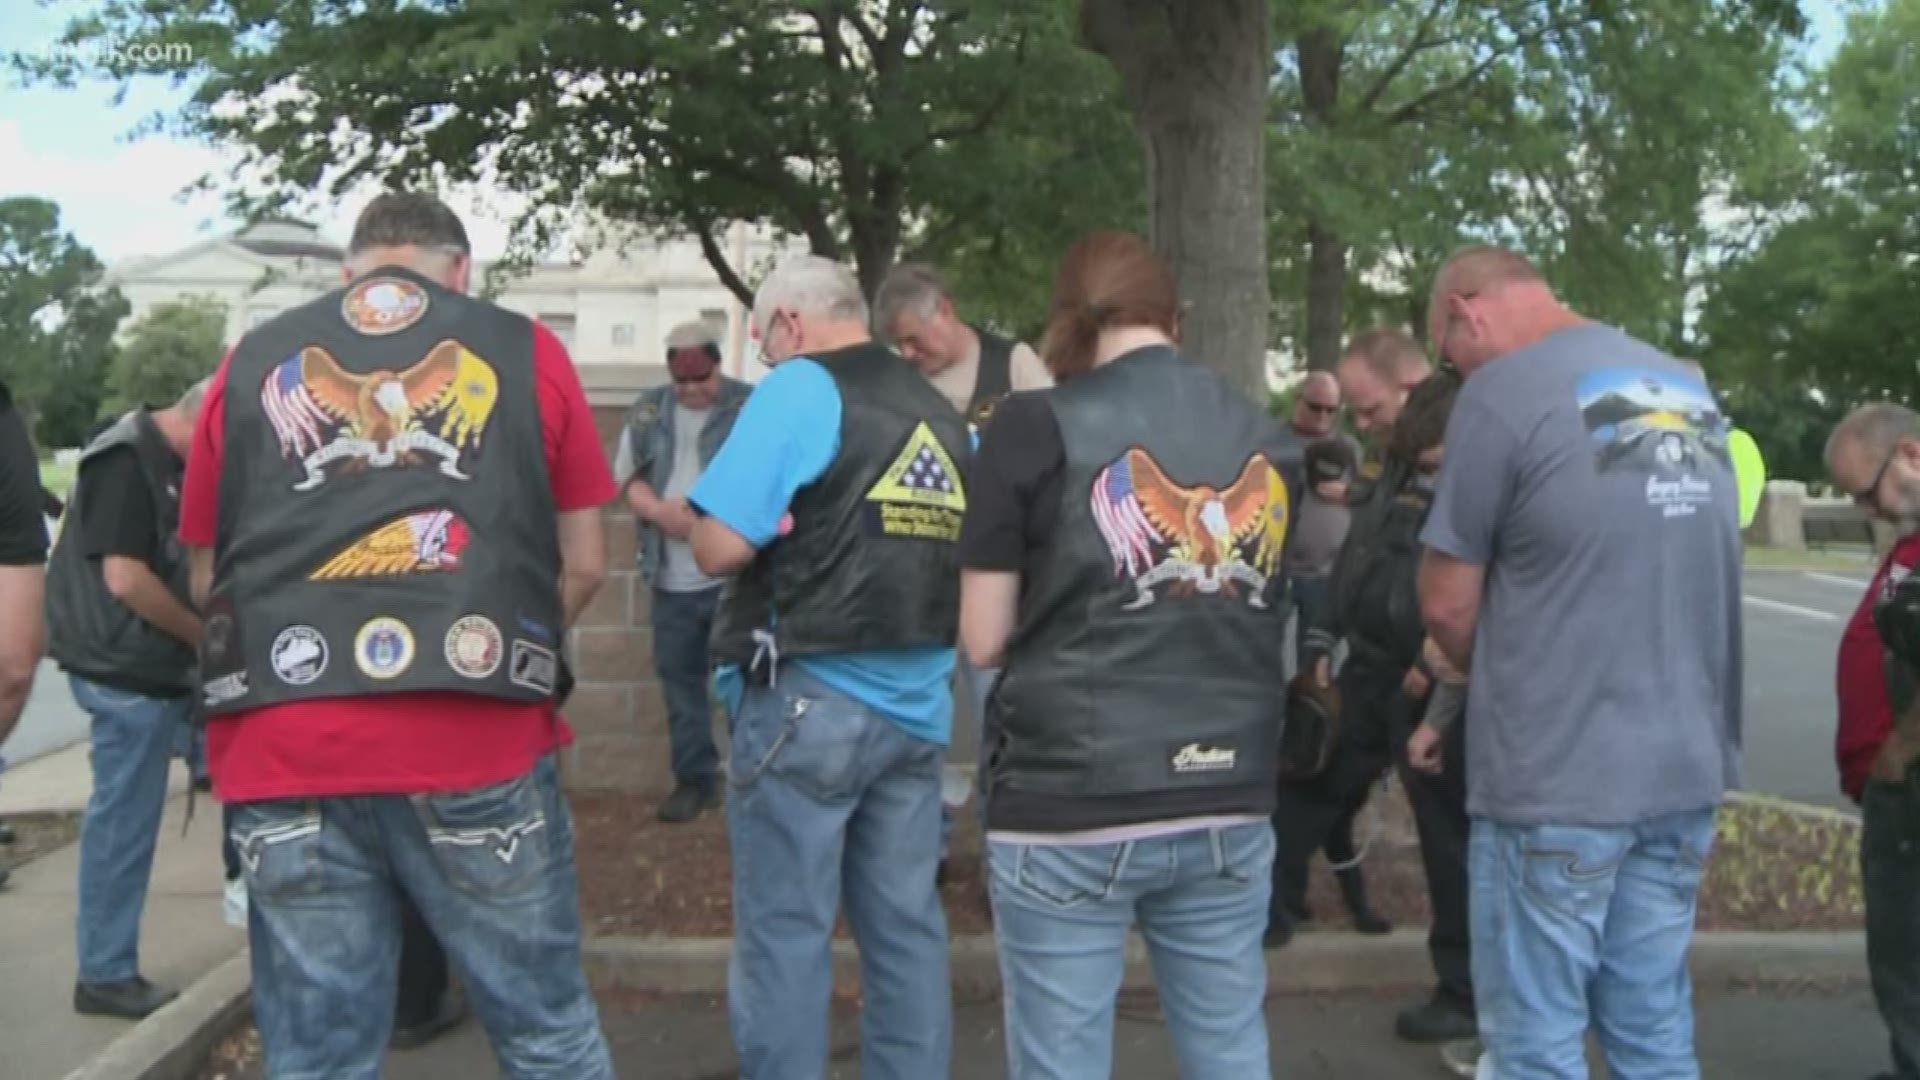 Dozens of bikers met in front of the Arkansas State Capitol for a ride to honor the seven victims of a deadly motorcycle crash in New Hampshire.